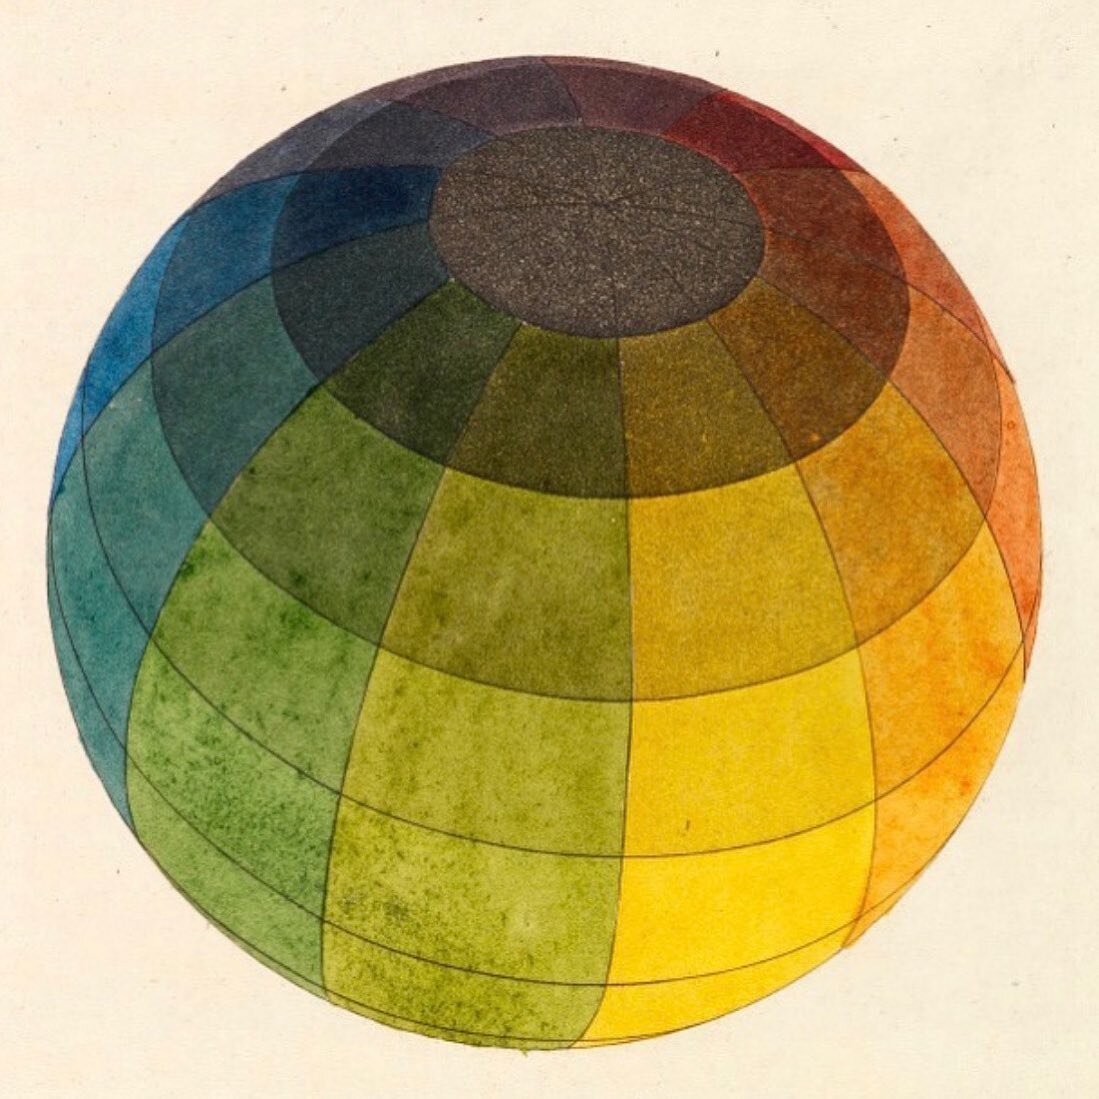 Color Ball, detail from a book by Philipp Otto Runge (1777-1810).